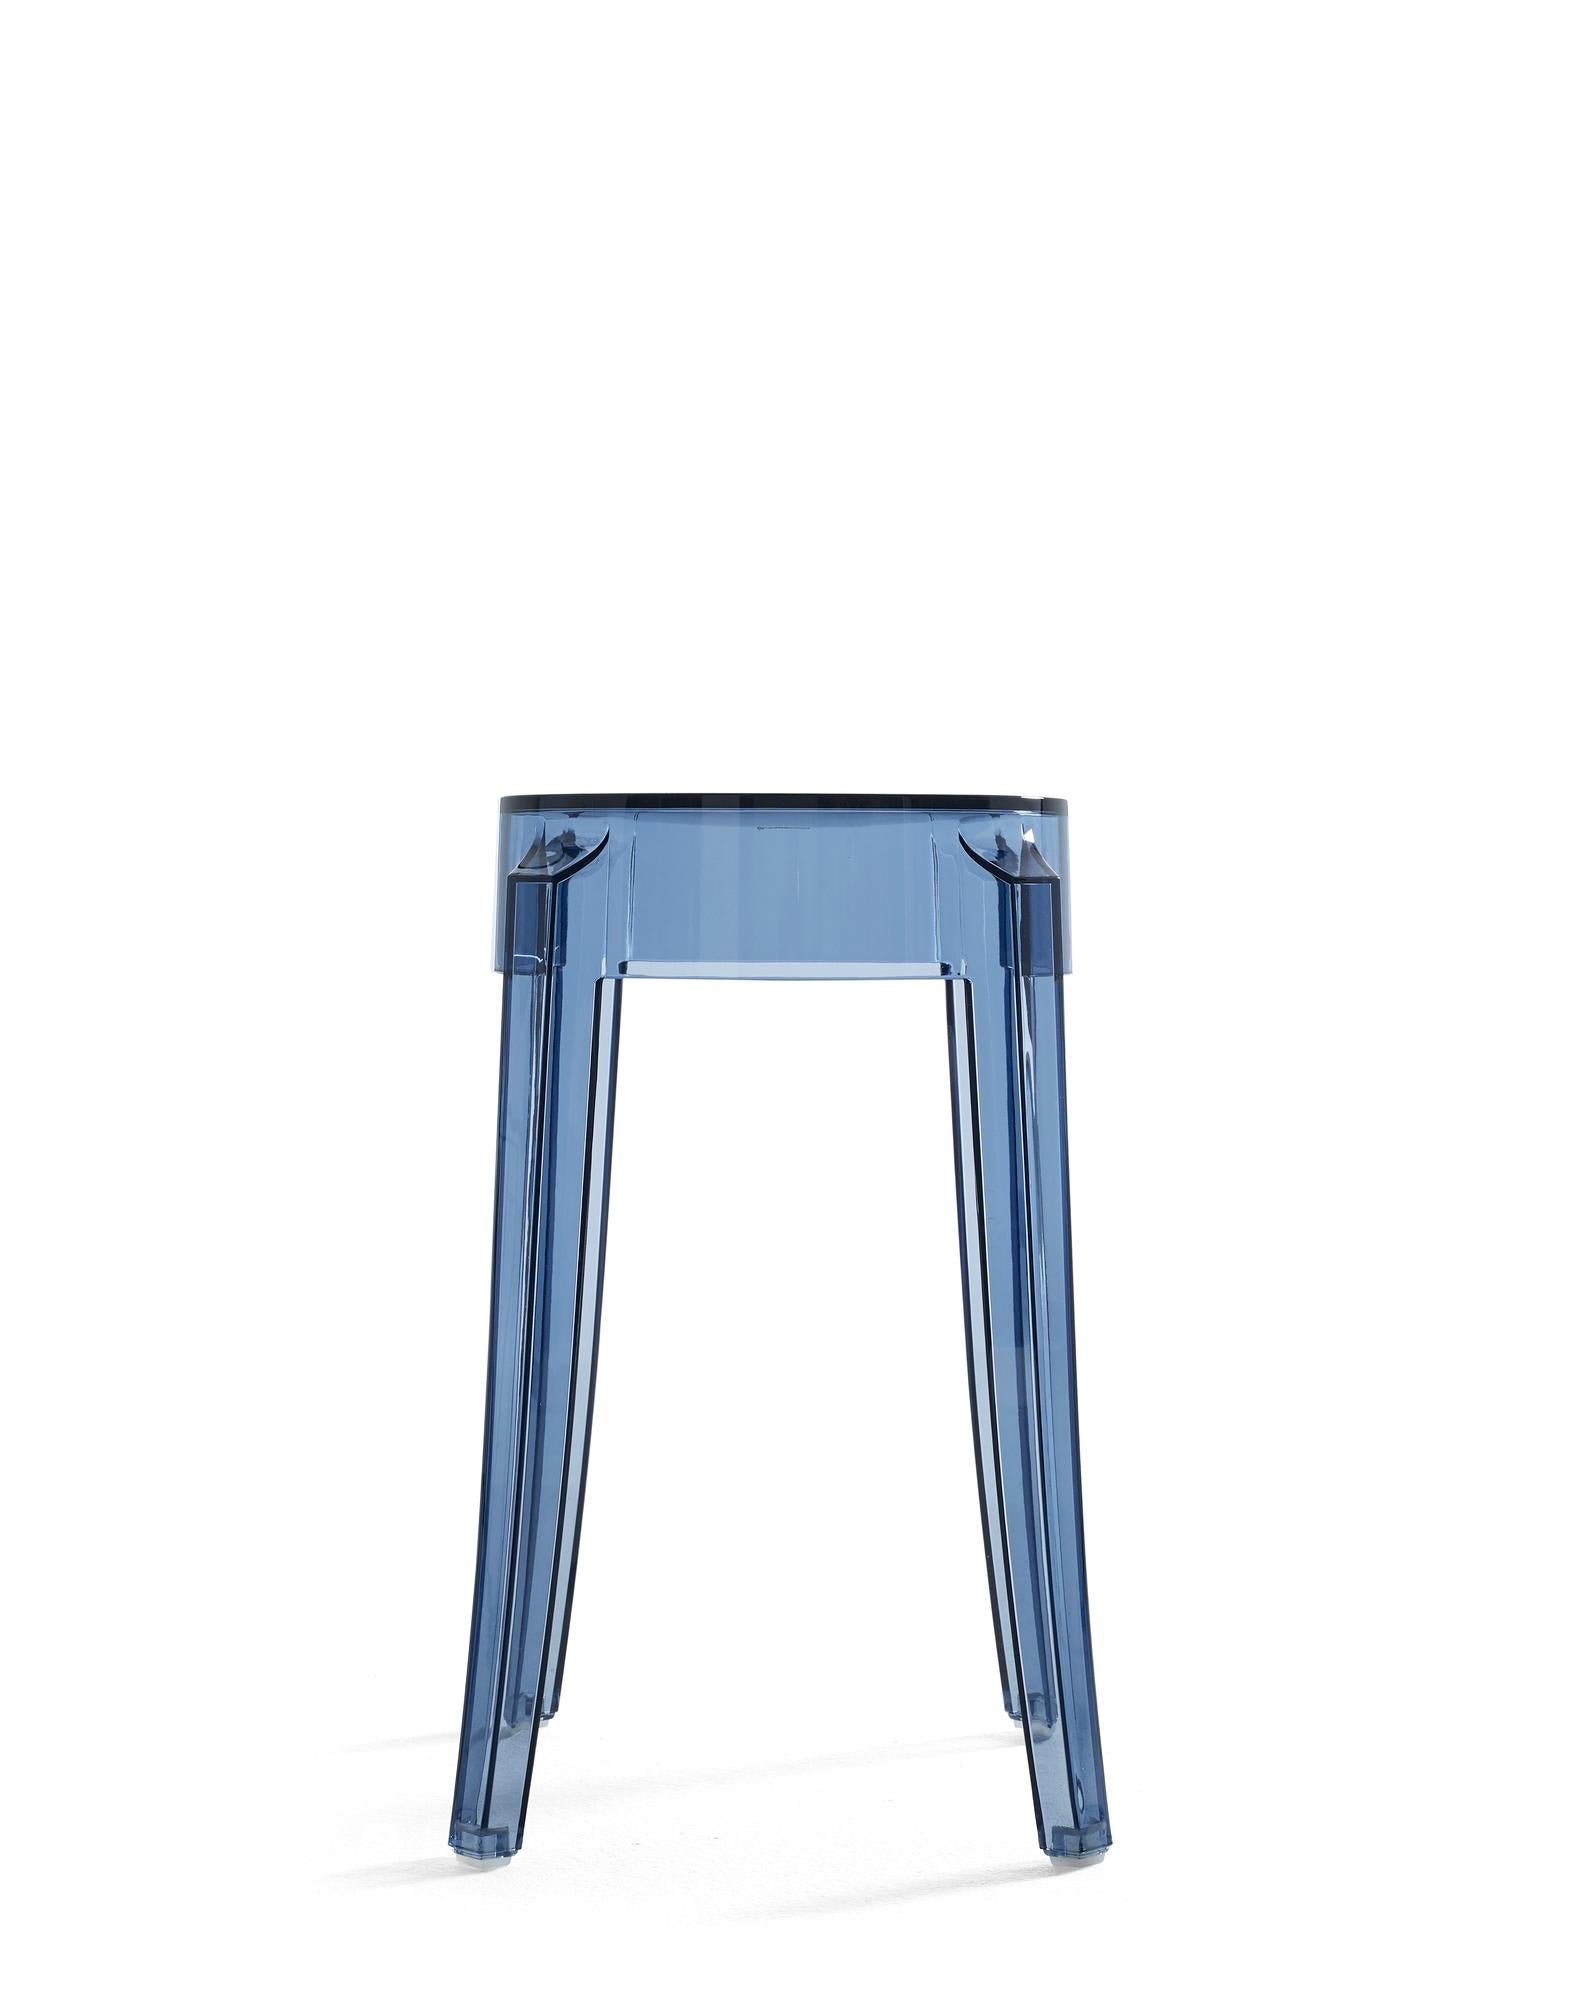 The shape conjures up stools of the 1800s and the line of the legs is rounded and slightly upturned, an icon of the Classic high stool. Charles Ghost is constructed from a single block of transparent polycarbonate which makes it indestructible and